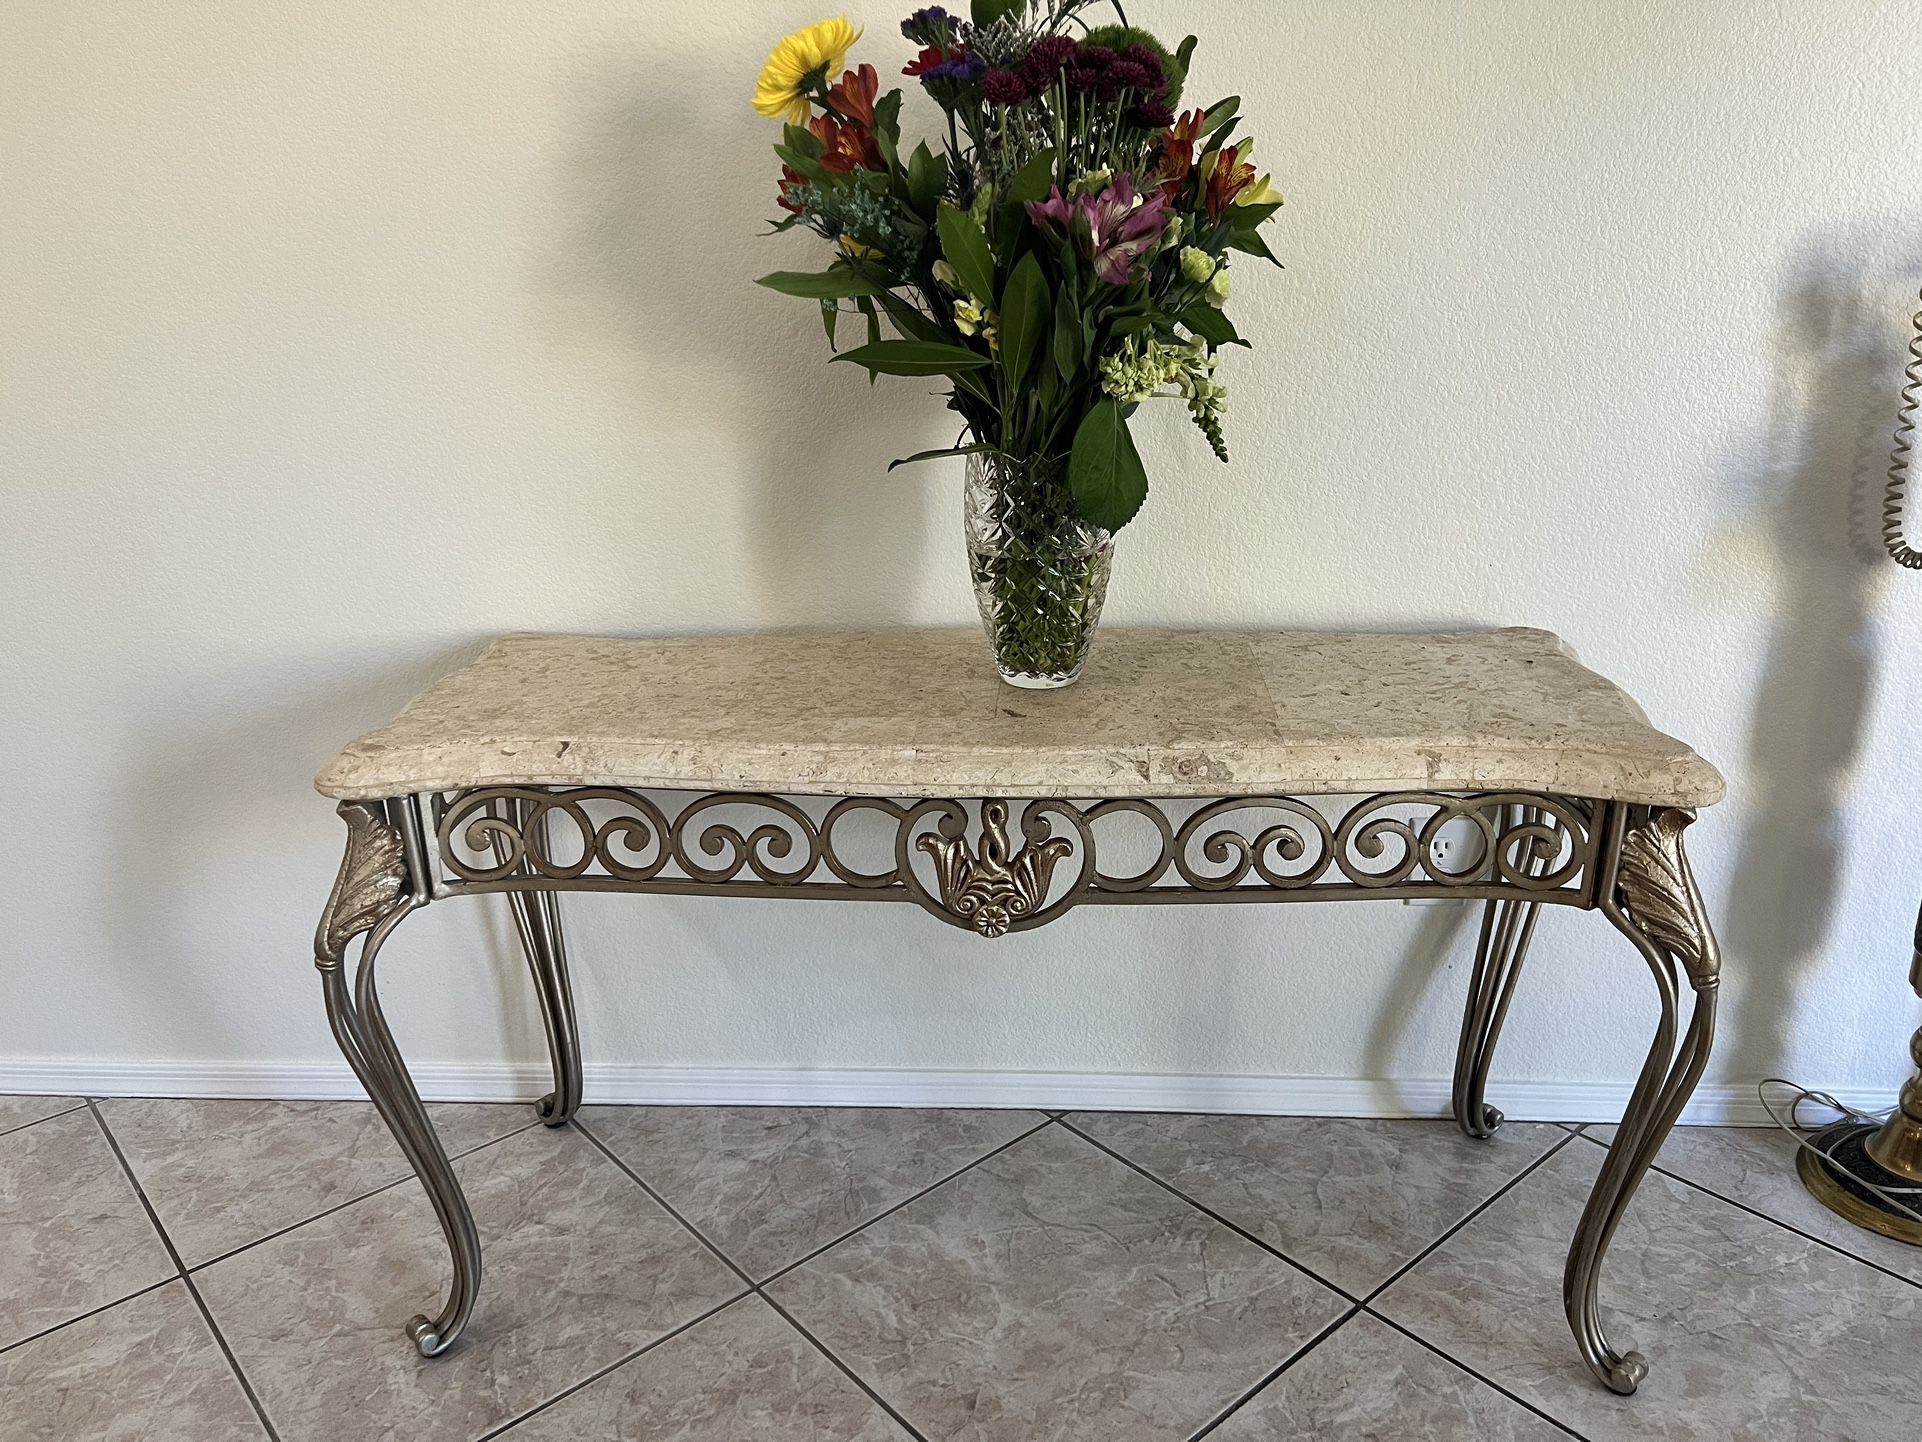 Real Marble coffee table, Antique Cast Iron Console Table